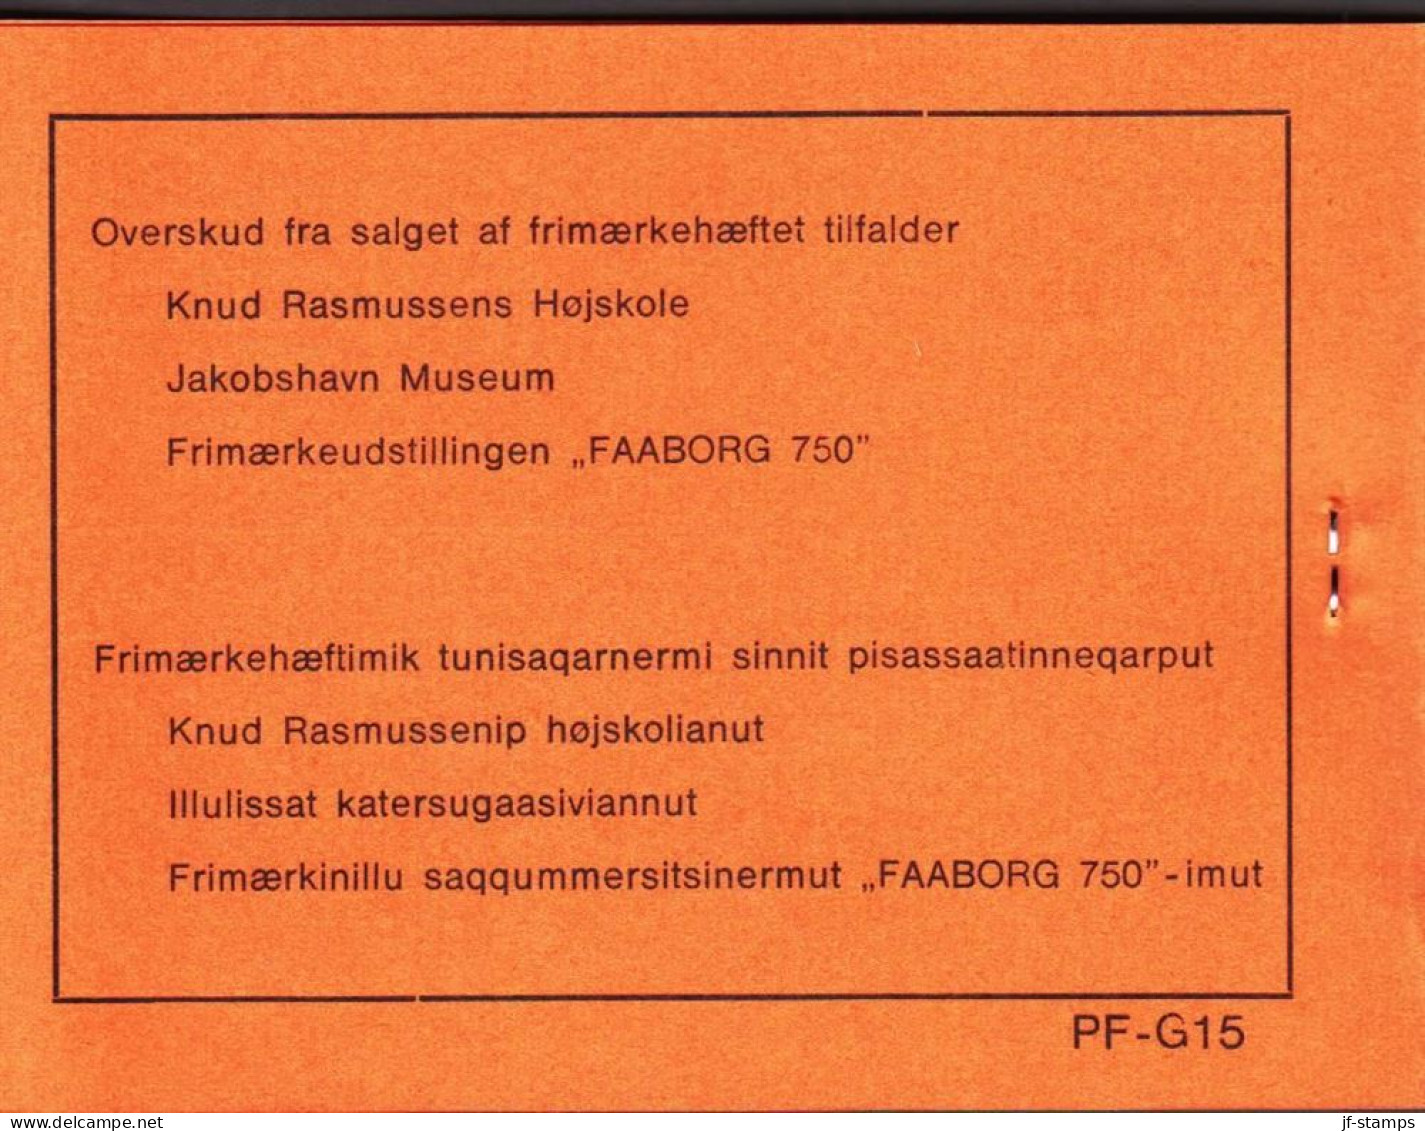 1979. GRØNLAND.  Knud Rasmussen 130+20 Øre Red 4-Block. Private Stamp Booklet Produced By A S... (Michel 116) - JF545586 - Ungebraucht